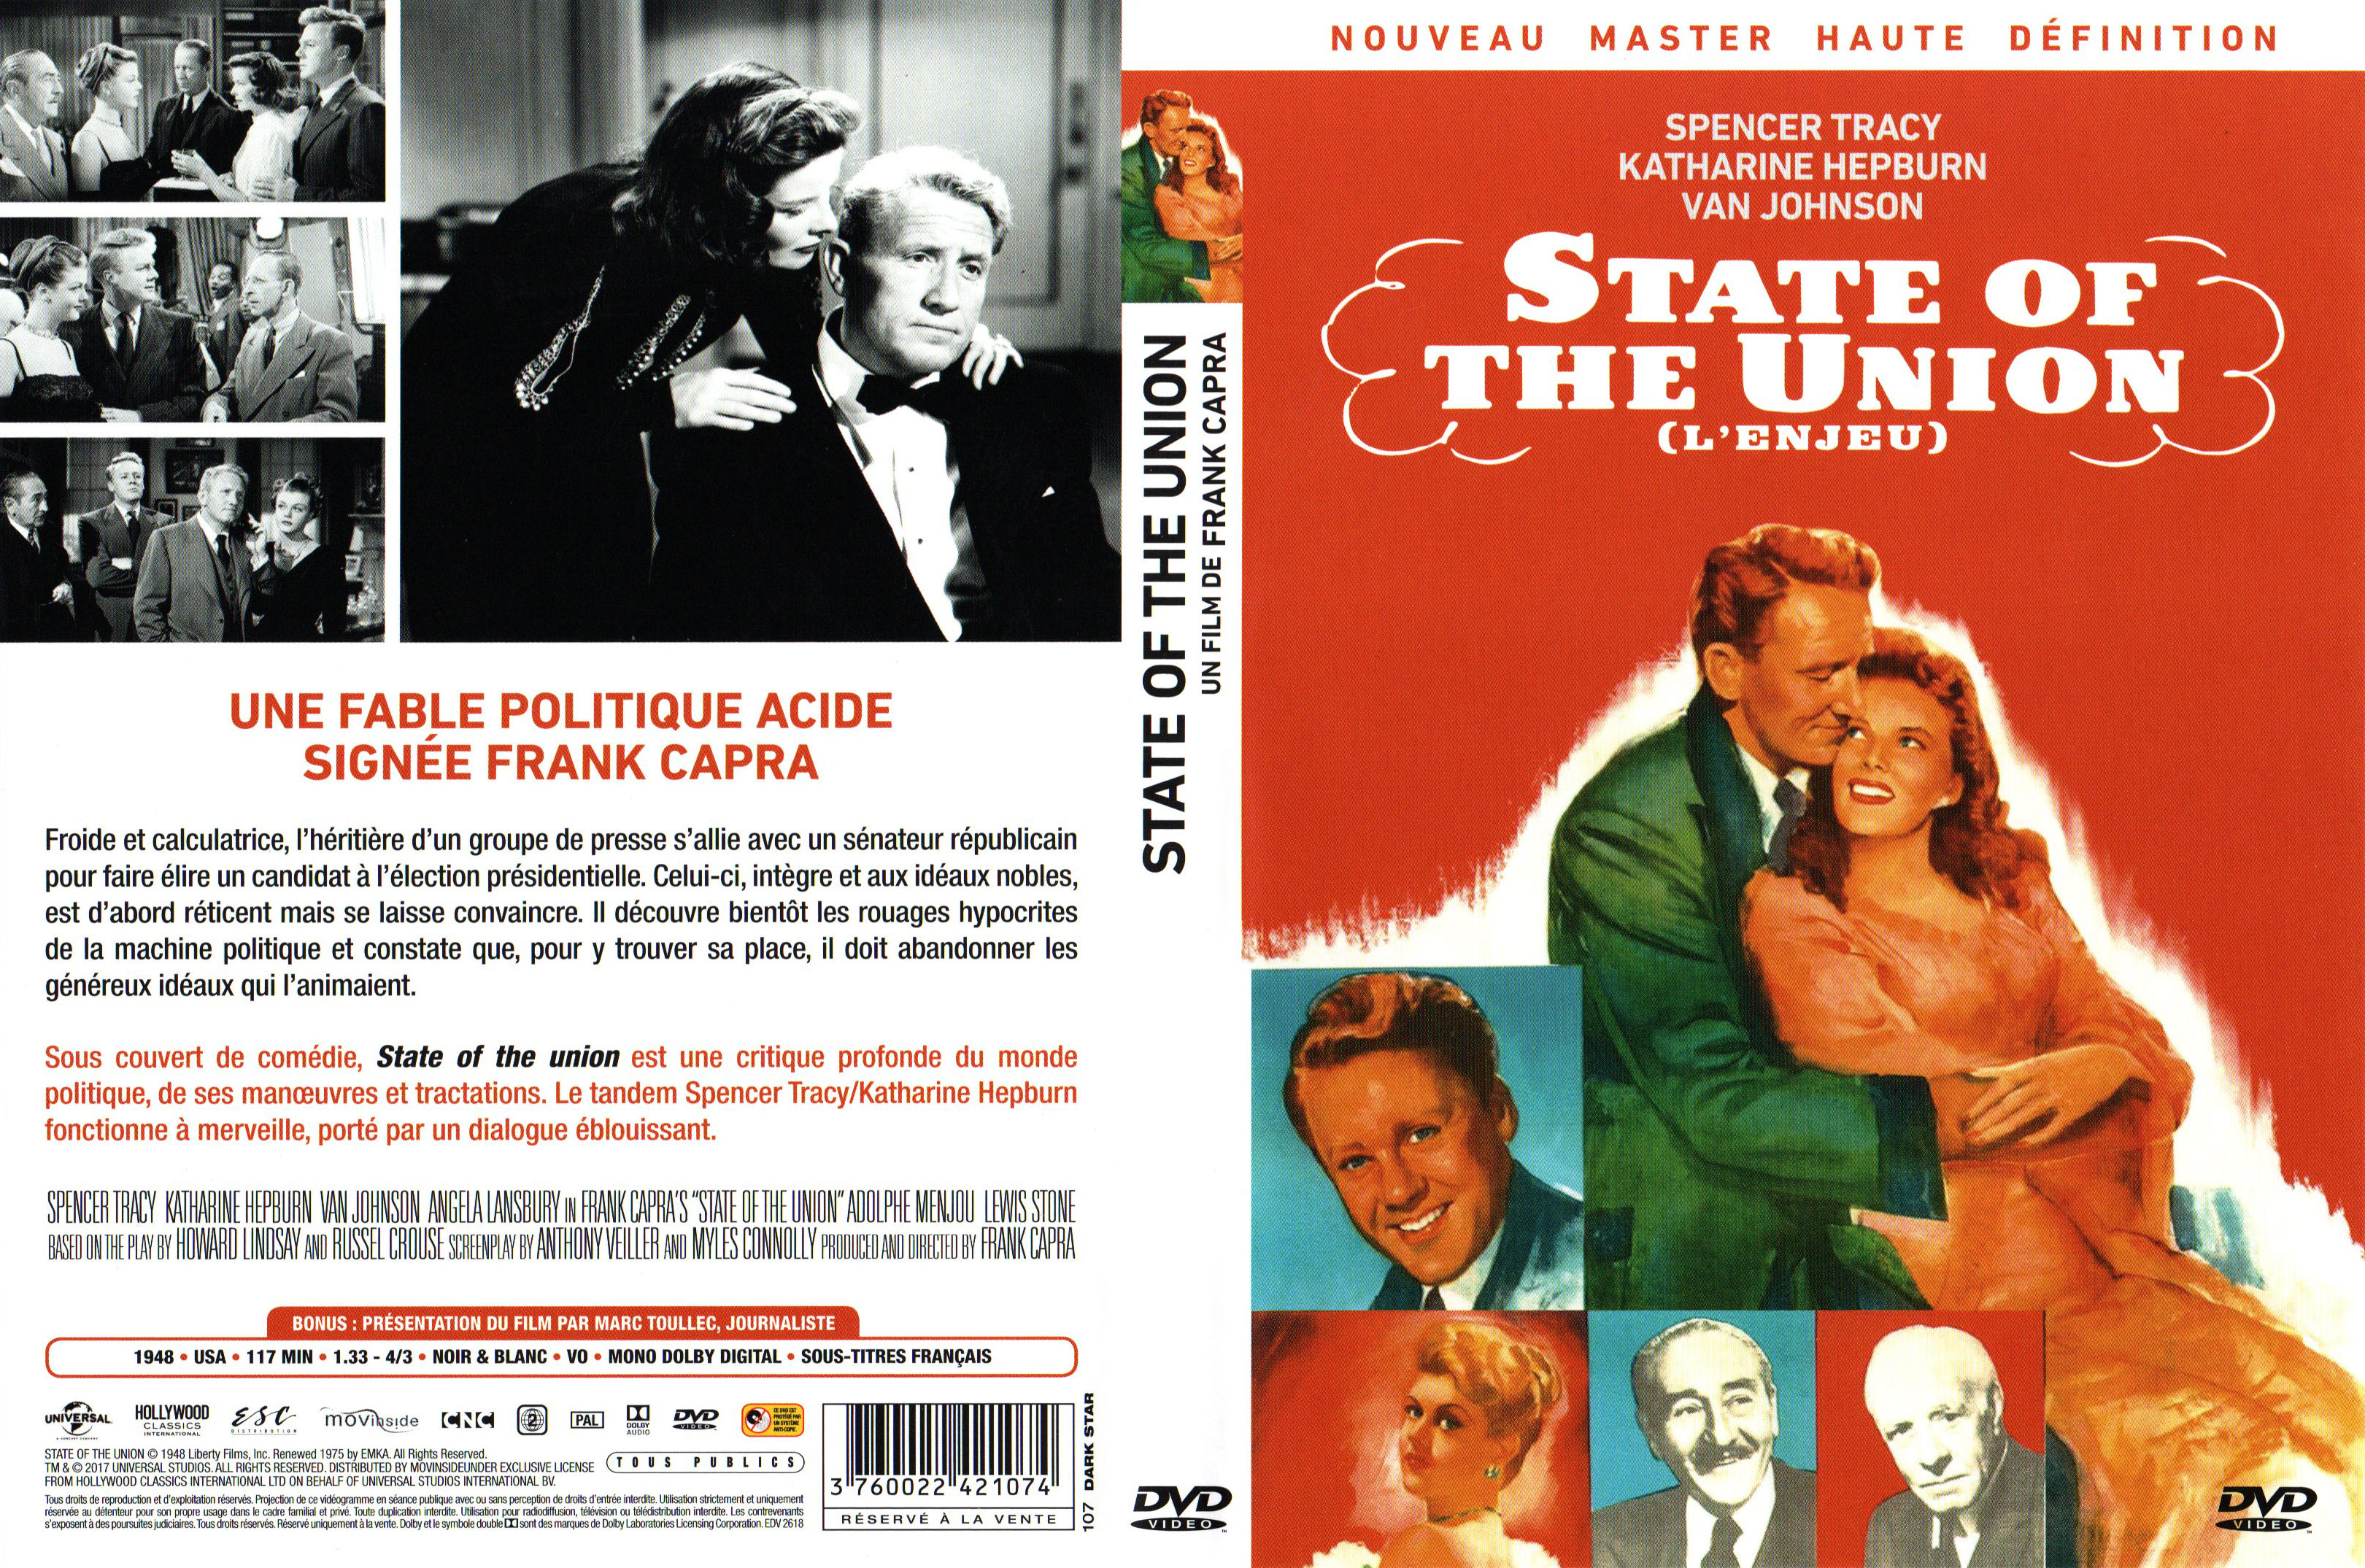 Jaquette DVD State of the Union - L